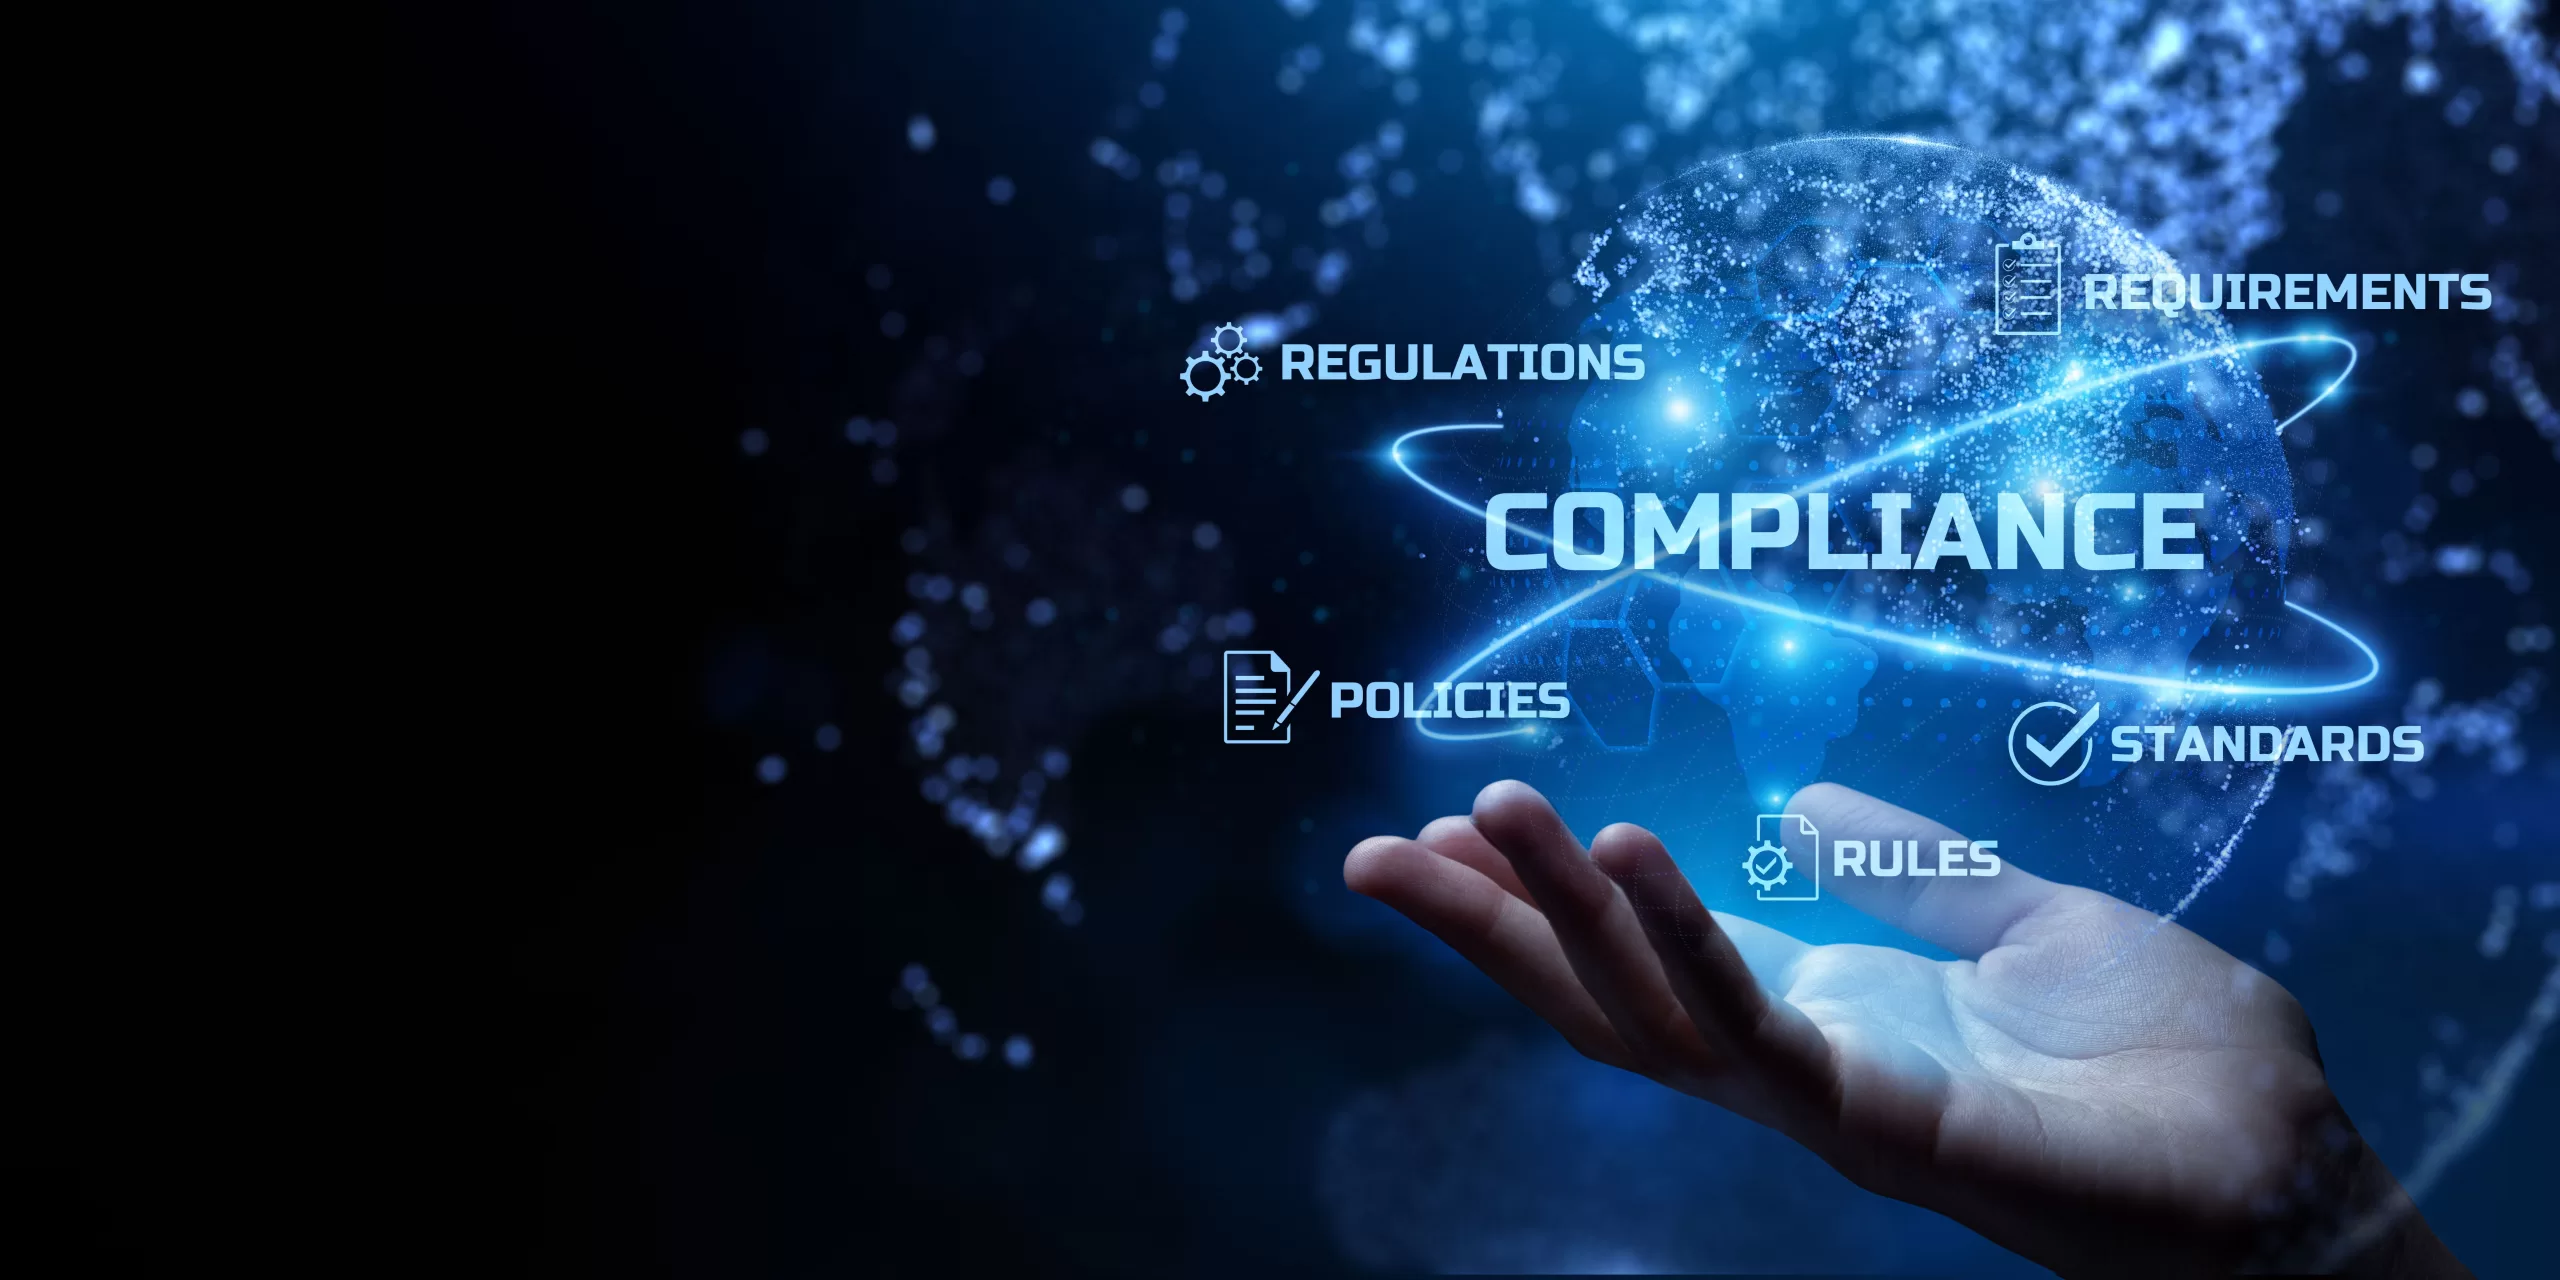 This image is a shows a dark background with a hand at the bottom of the image circulating the word compliance above it in blue in a futuristic manner. This image is used by patient guard to represent their medical device and IVD regulatory and quality assurance consultancy services.